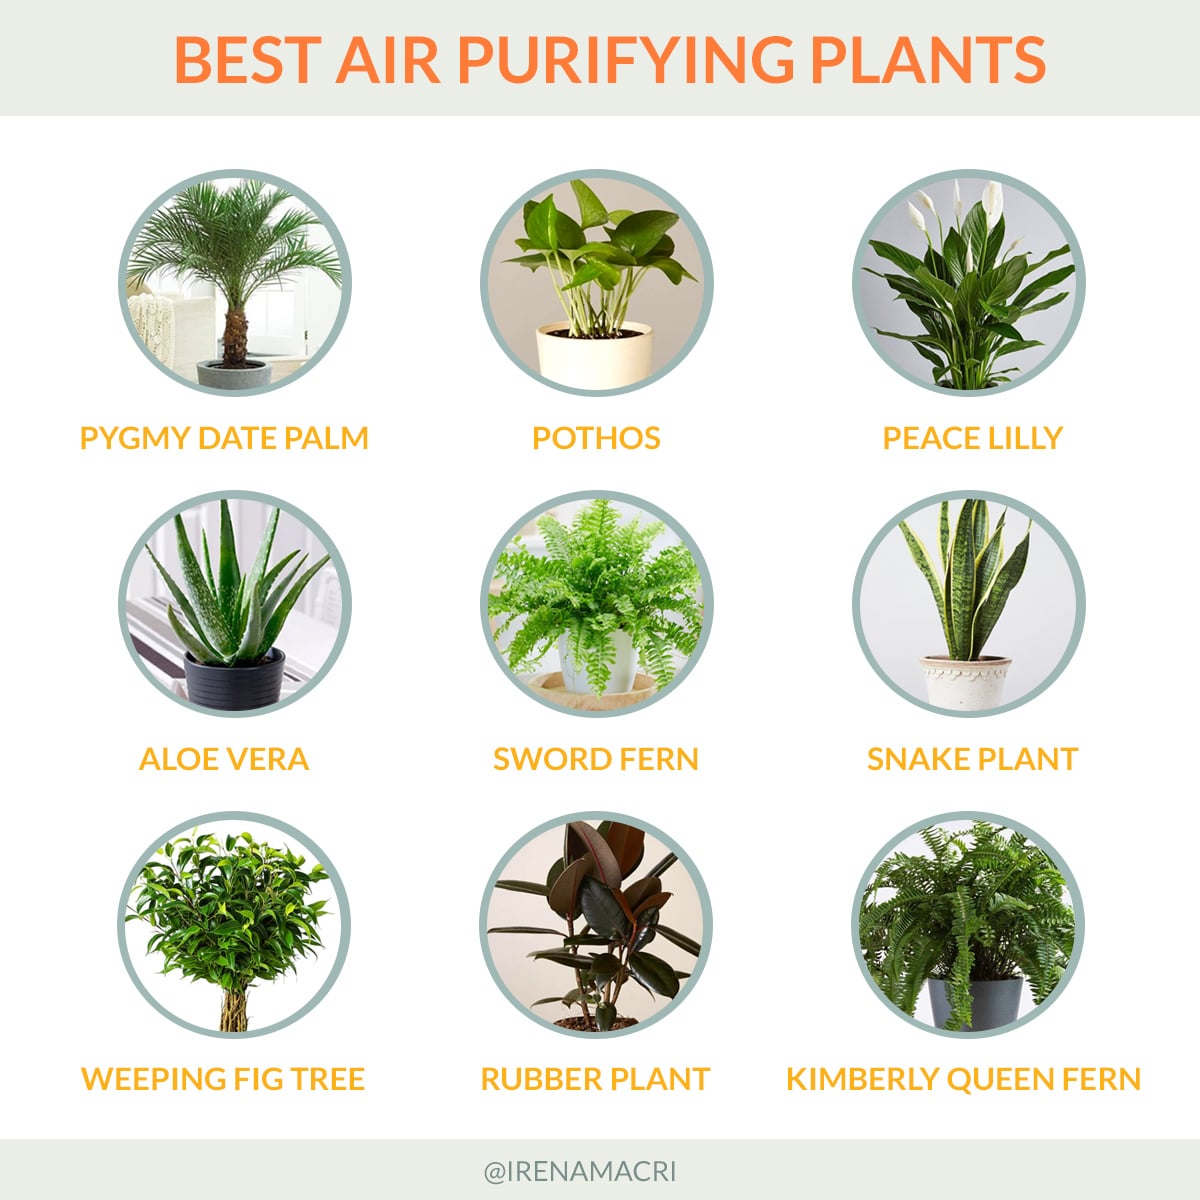 Best air purifying plant for your home office